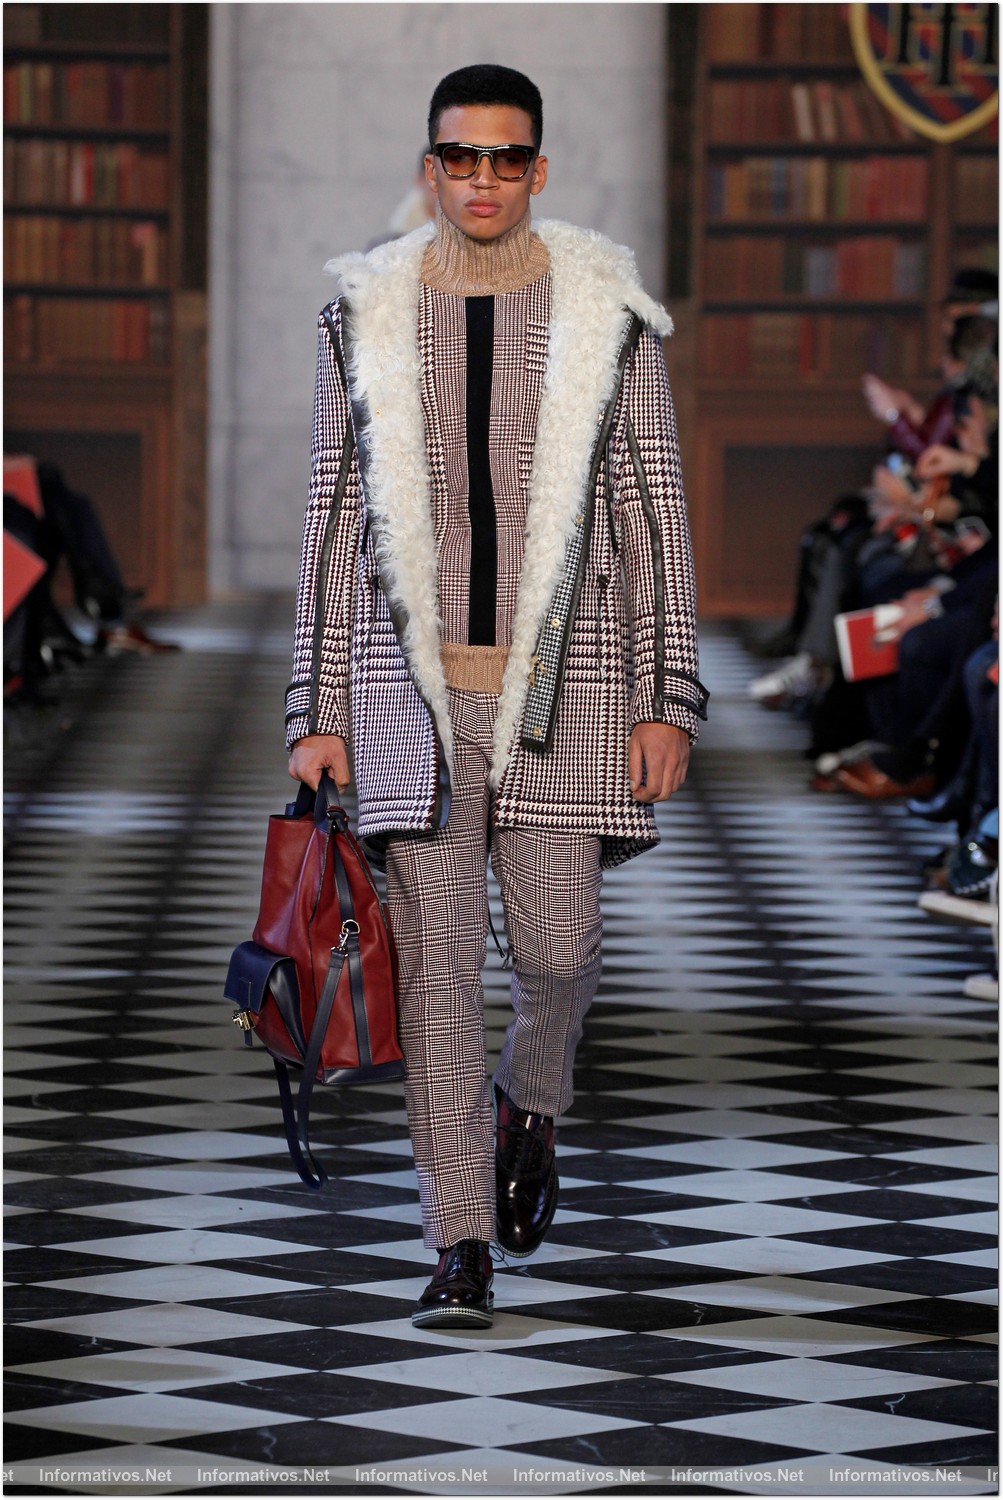 NY08FEB013.- Desfile Tommy Hilfiger Fall 2013 Men's Collection. 6. HENRY